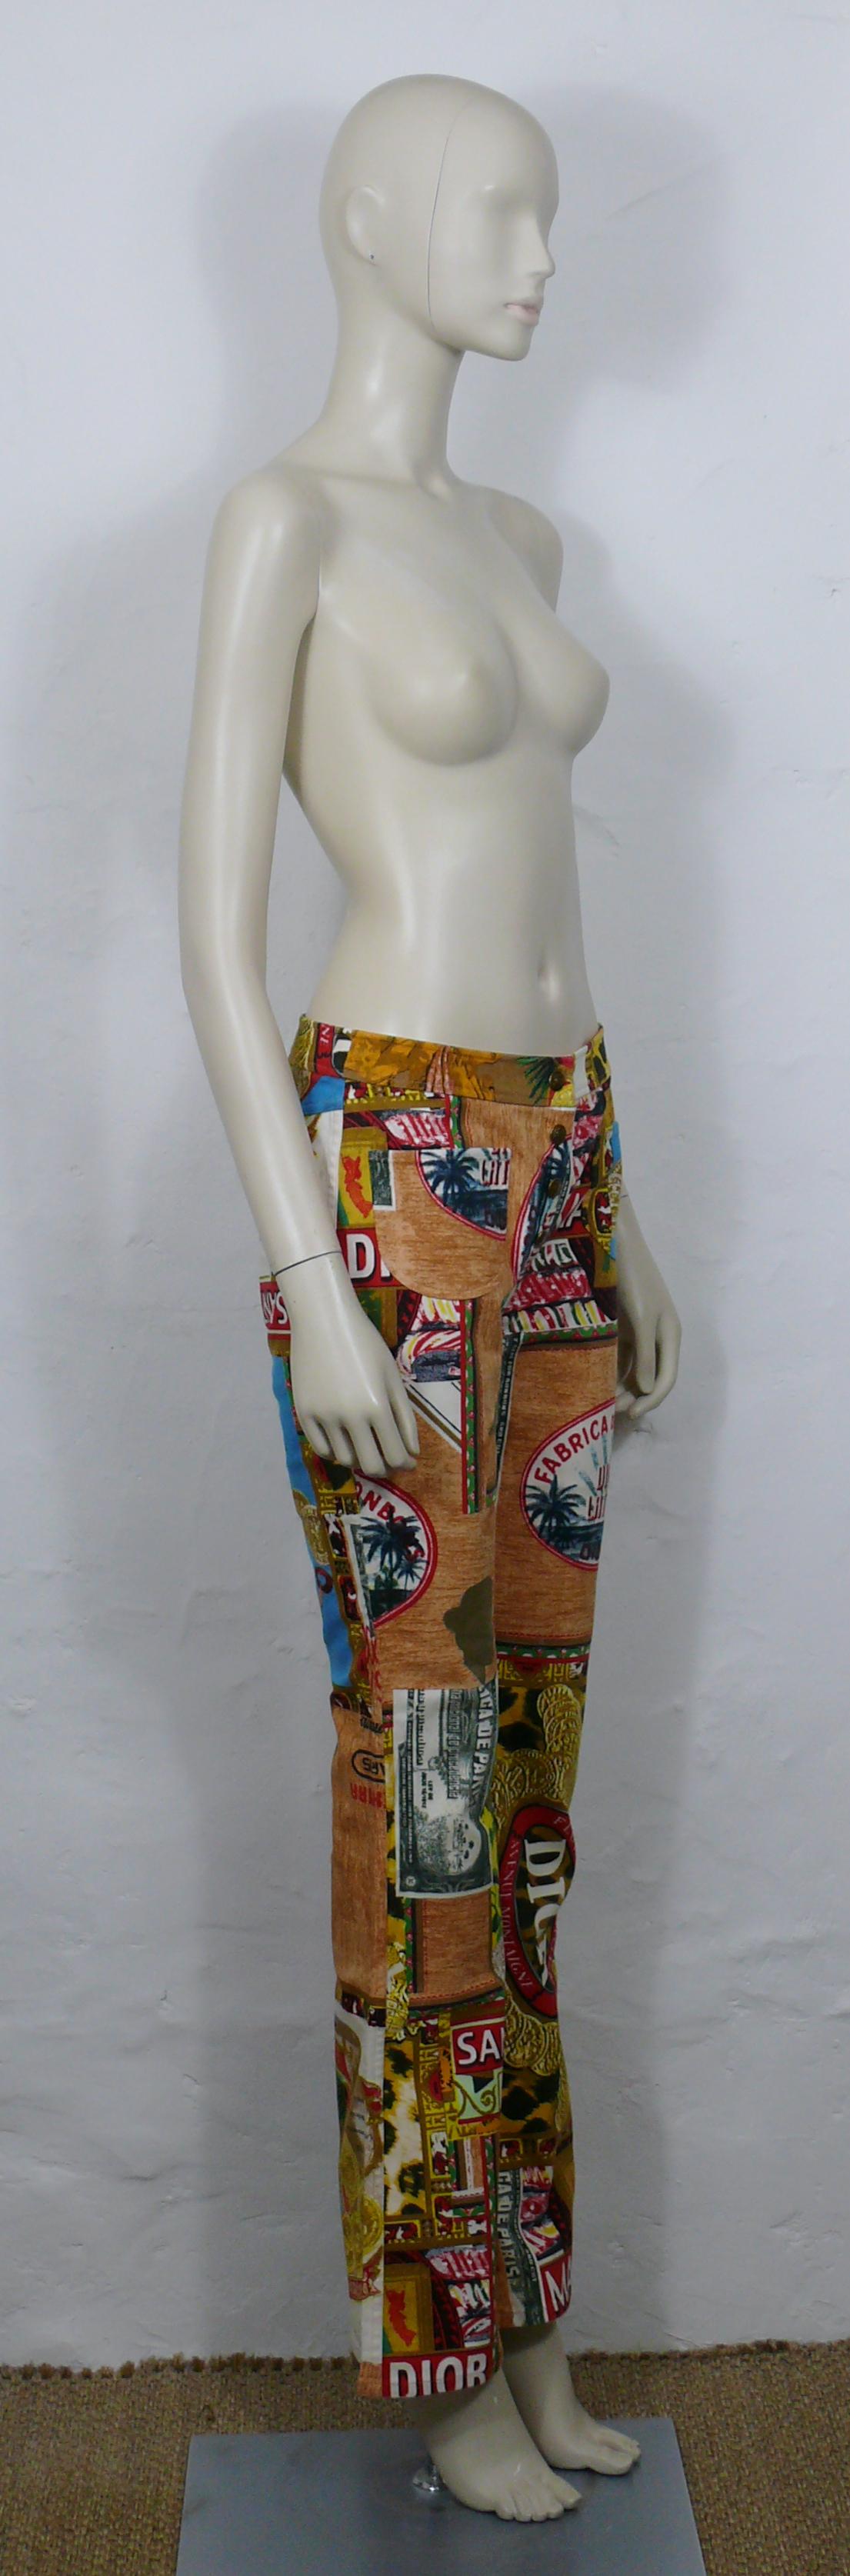 CHRISTIAN DIOR by JOHN GALLIANO vintage denim pants featuring Cuban/Latino inspired prints all over.

CHRISTIAN DIOR Spring/Summer 2002 Collection.

One snap button closure.
Faux buttons.
Hidden zippered closure.
Two patch pockets at the